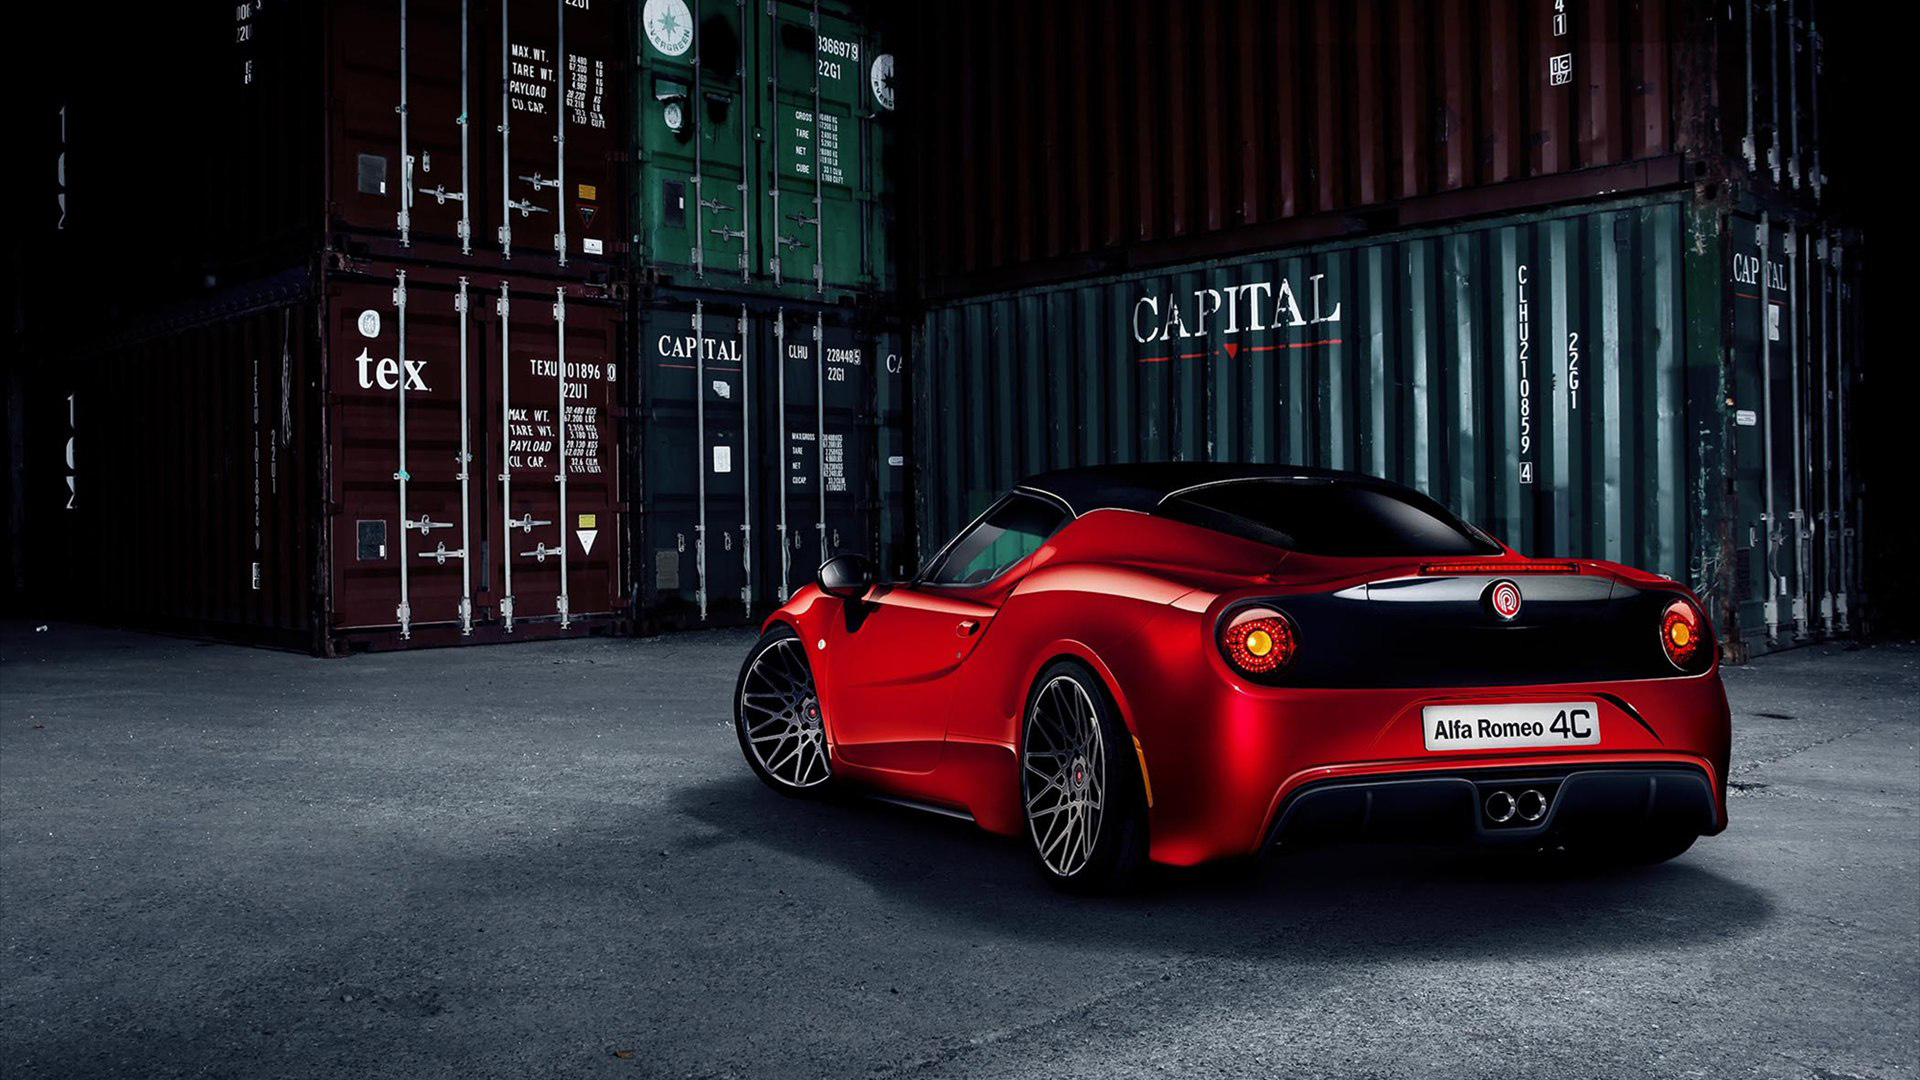 Alfa Romeo 4c Wallpaper High Definition With